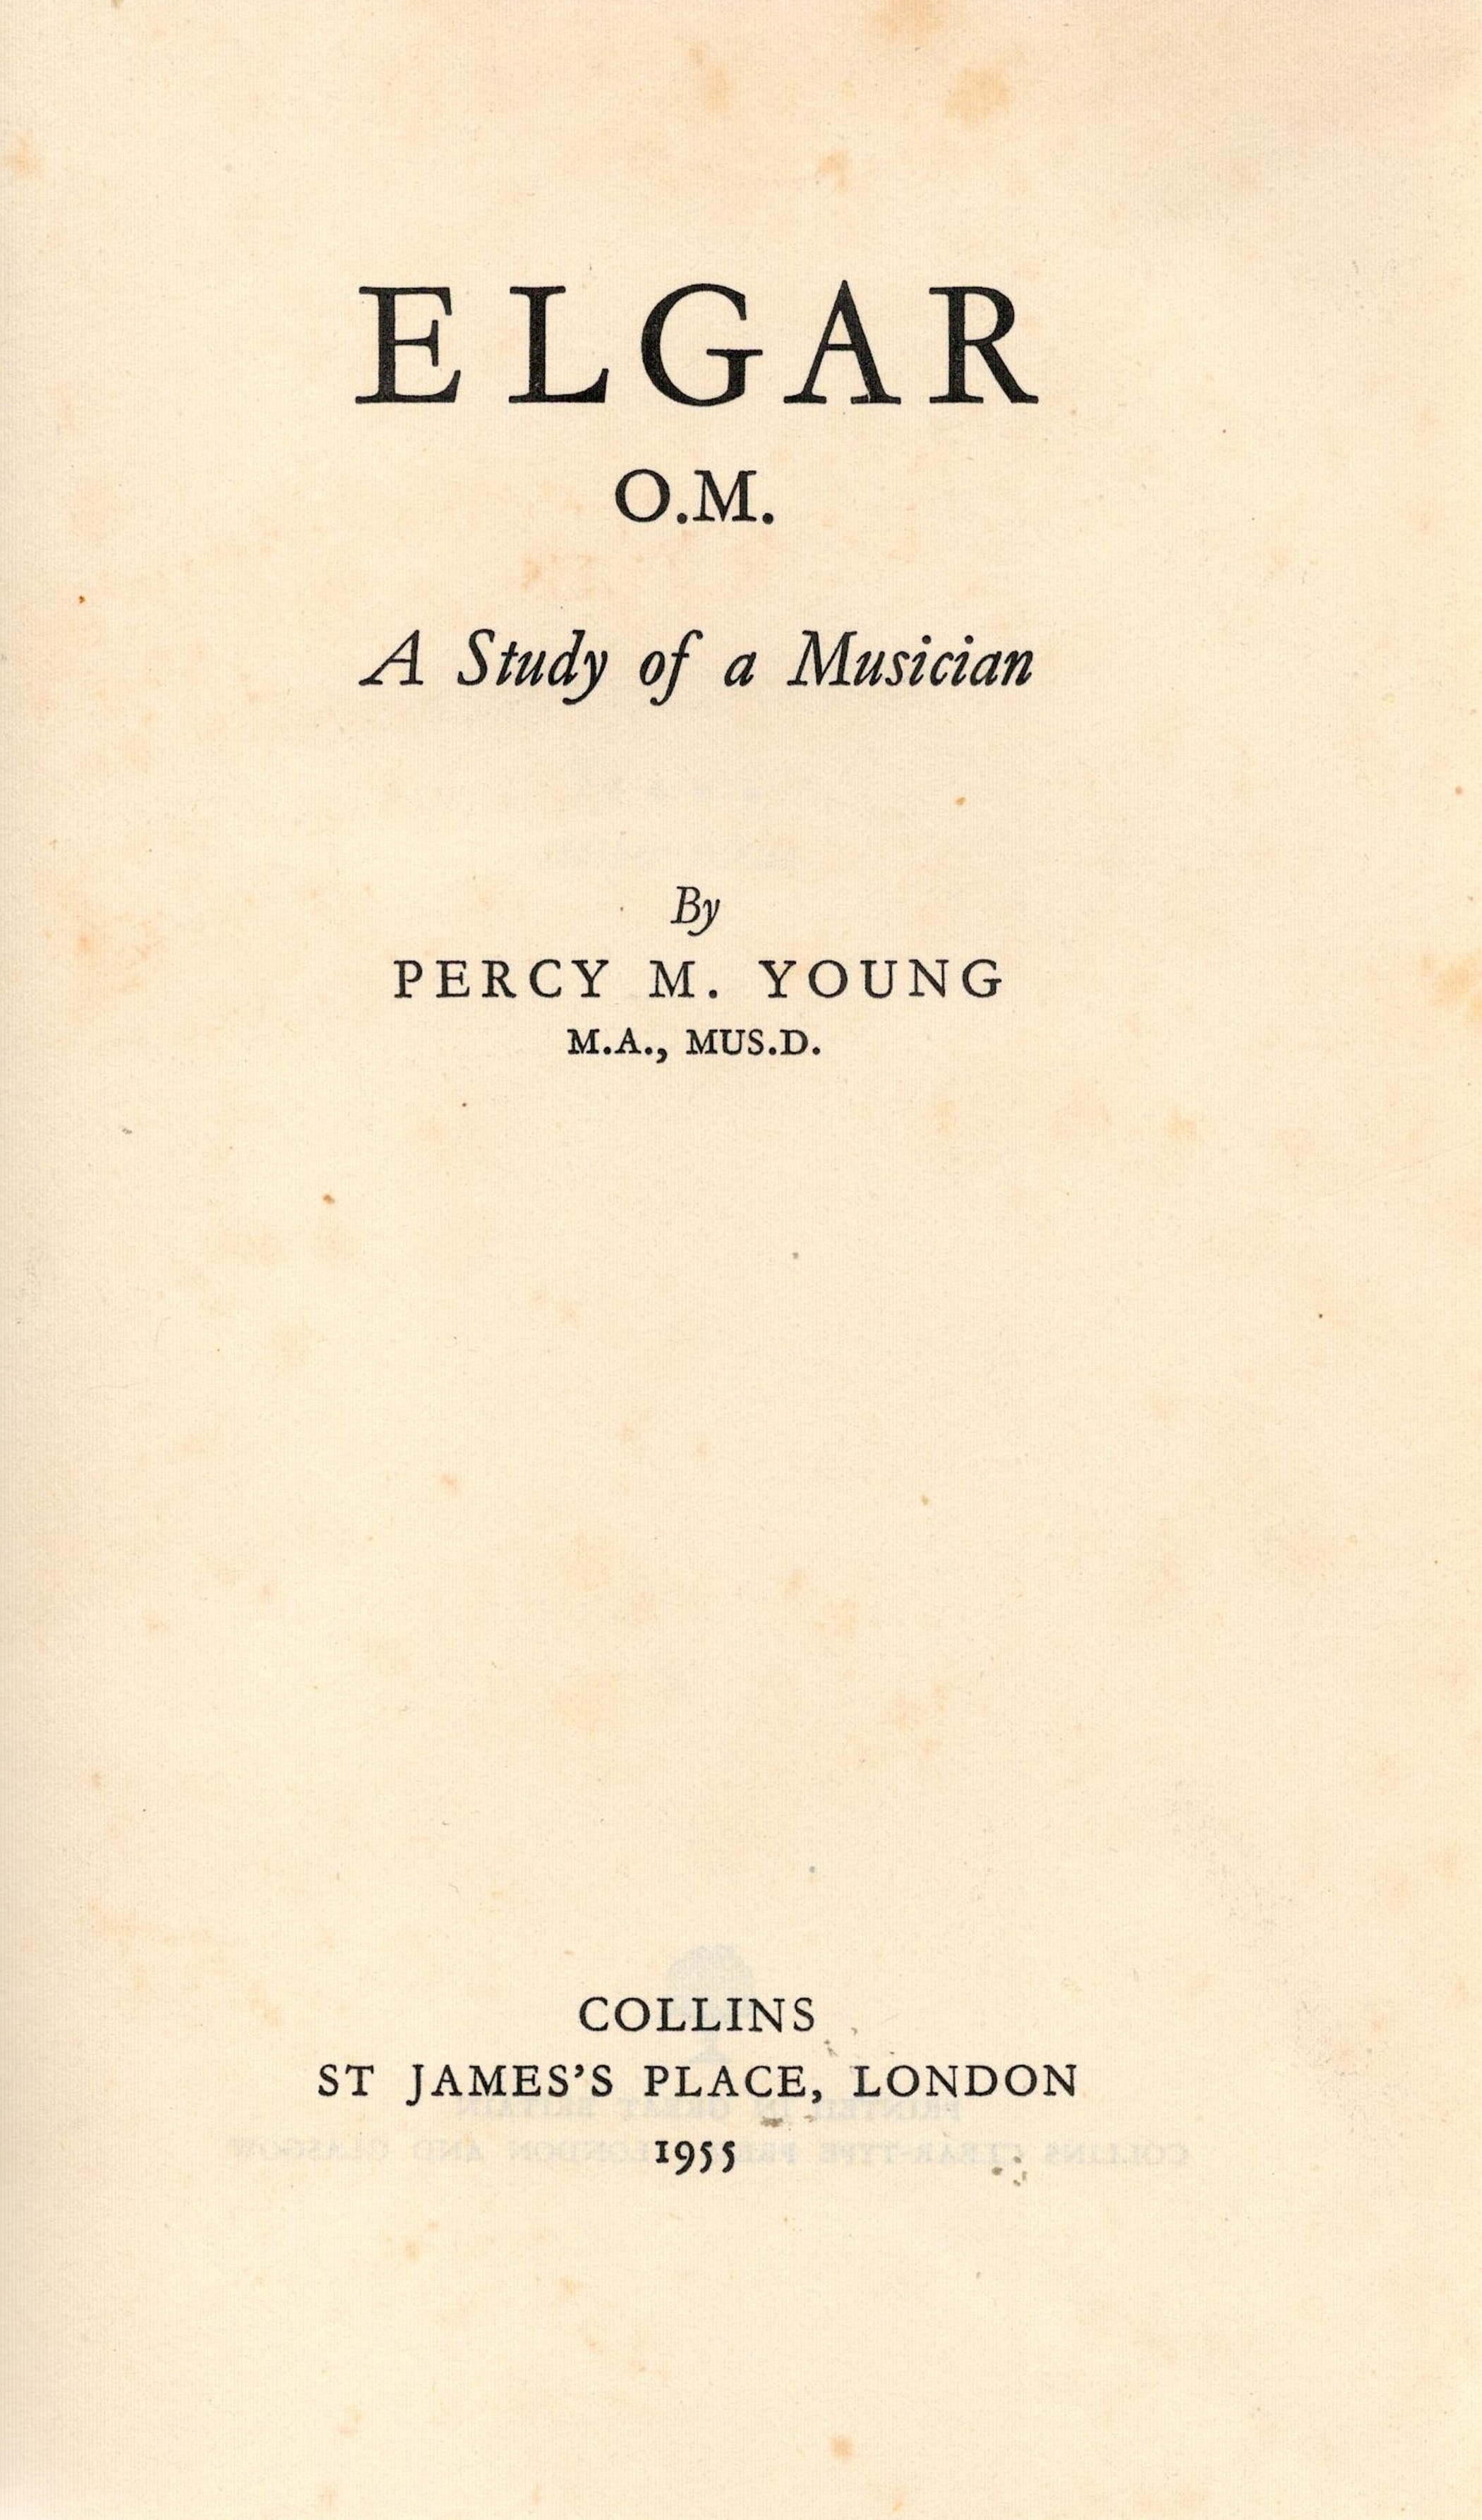 Percy Young Elgar O.M. A Study of A Musician First Edition 1955 Hardback Book published by Collins - Image 2 of 4